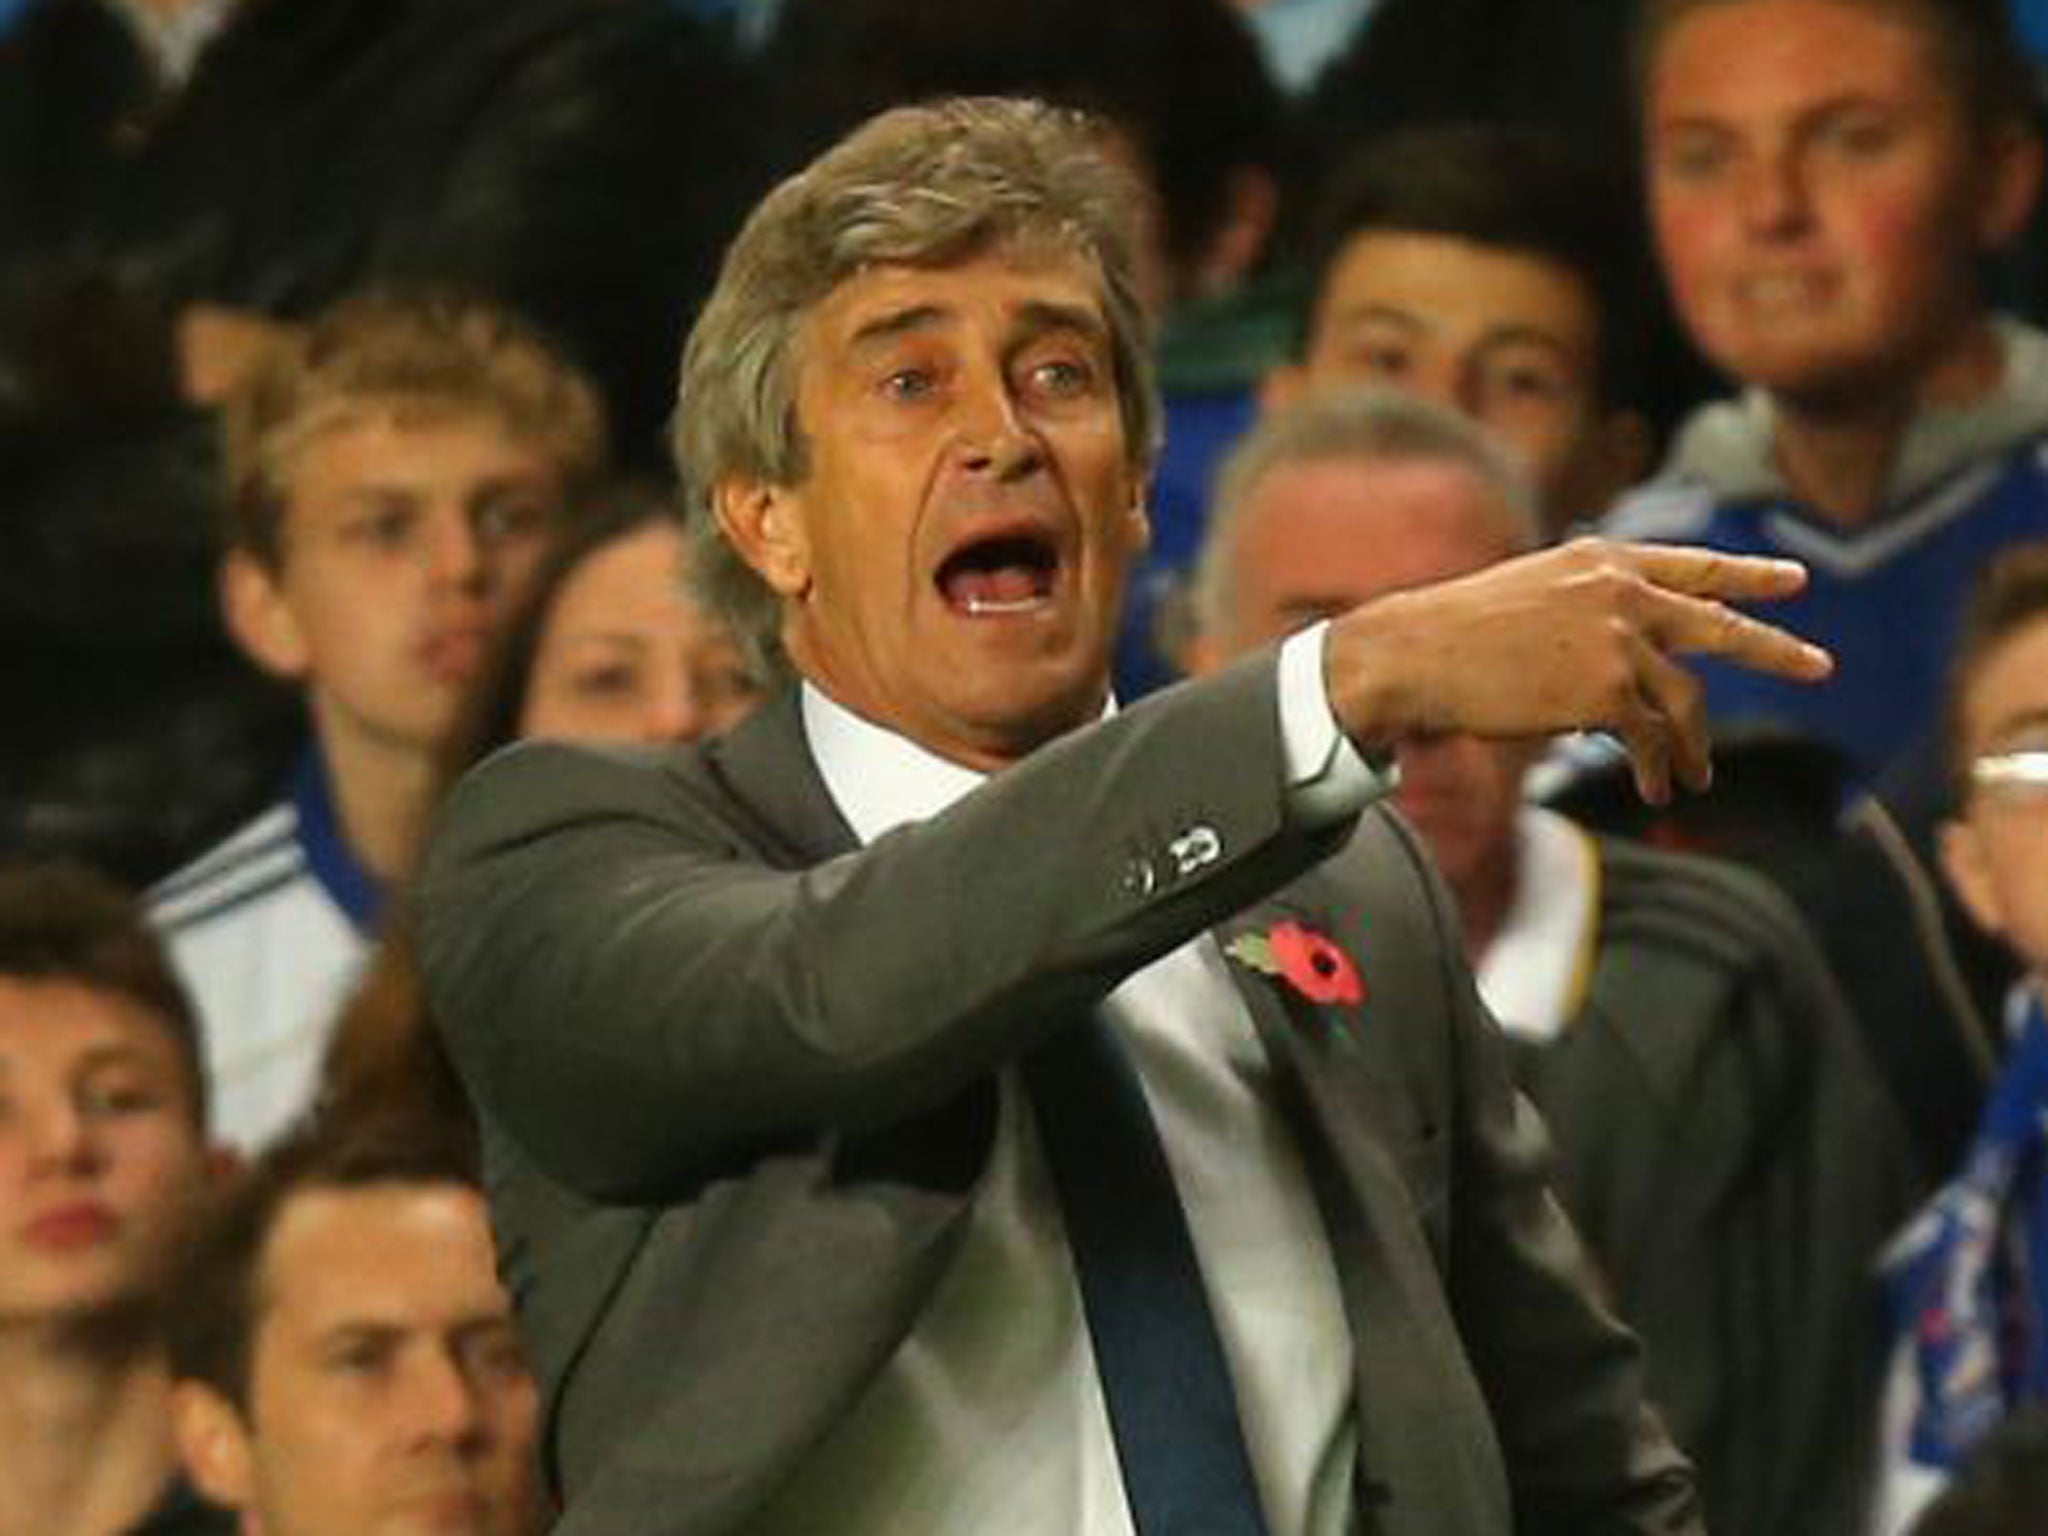 Manchester City manager Manuel Pellegrini was angered at how his opposite number, Jose Mourinho, celebrated Chelsea's winner